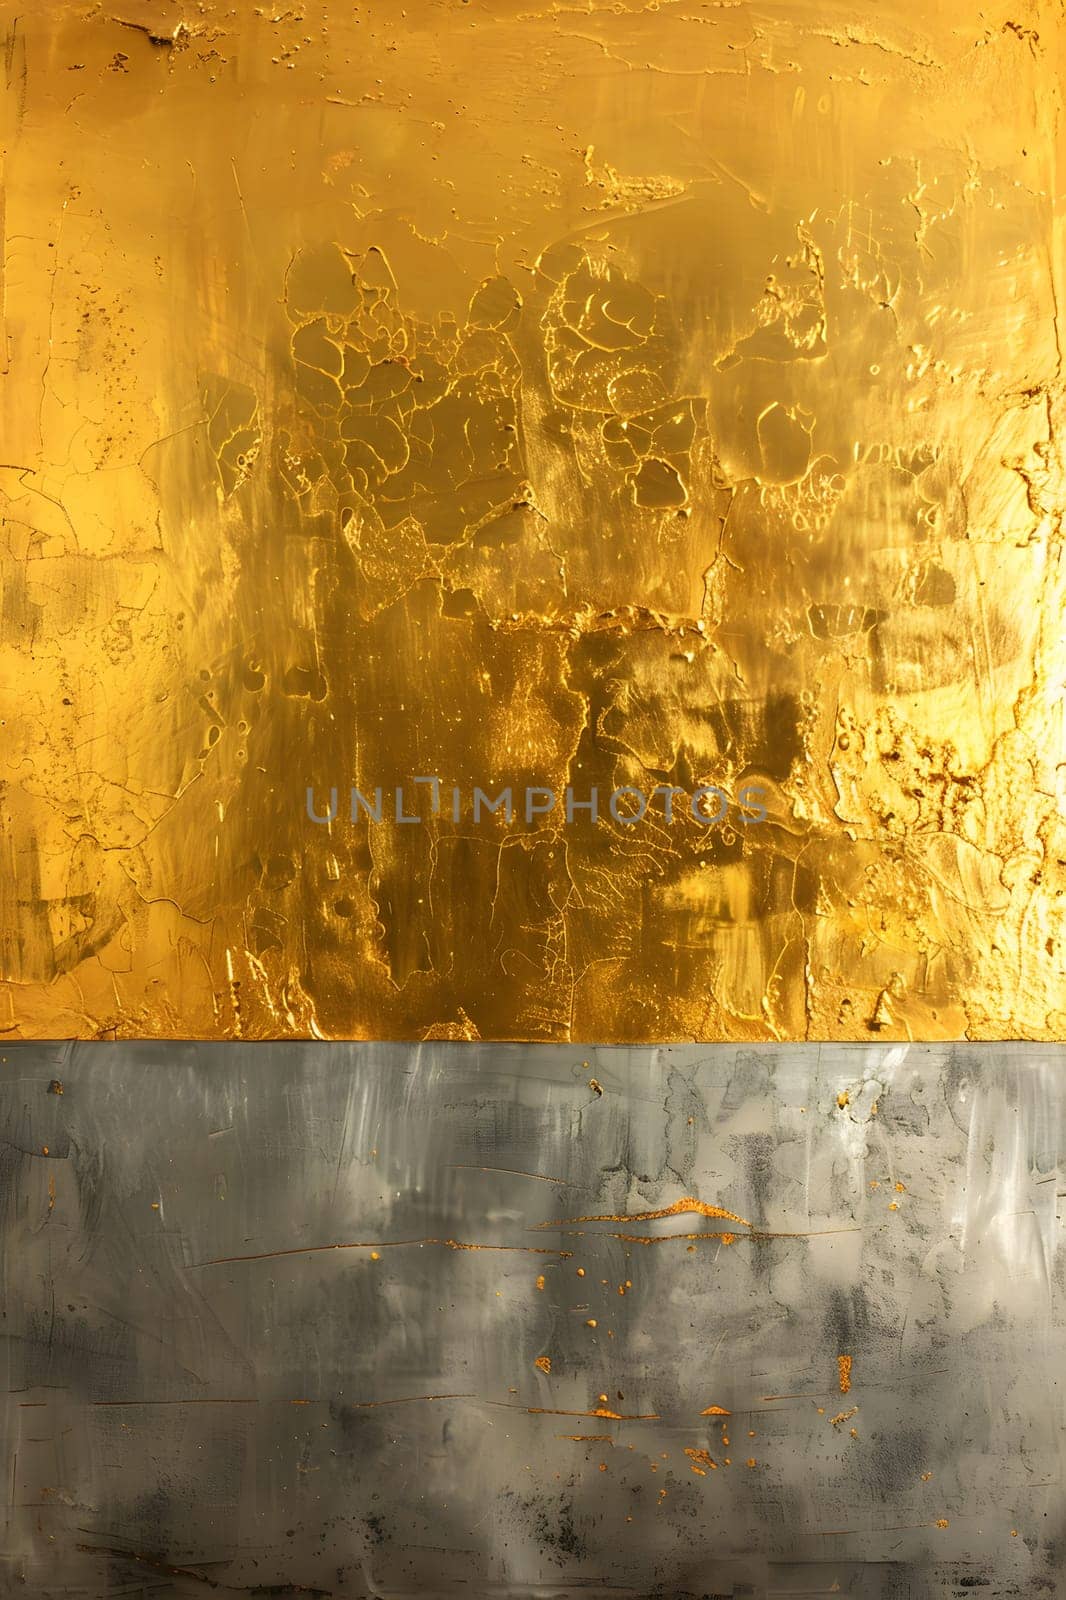 A close up of a brown wood rectangle with amber, gold, and silver liquid patterns on a wall, creating tints and shades of water and metal